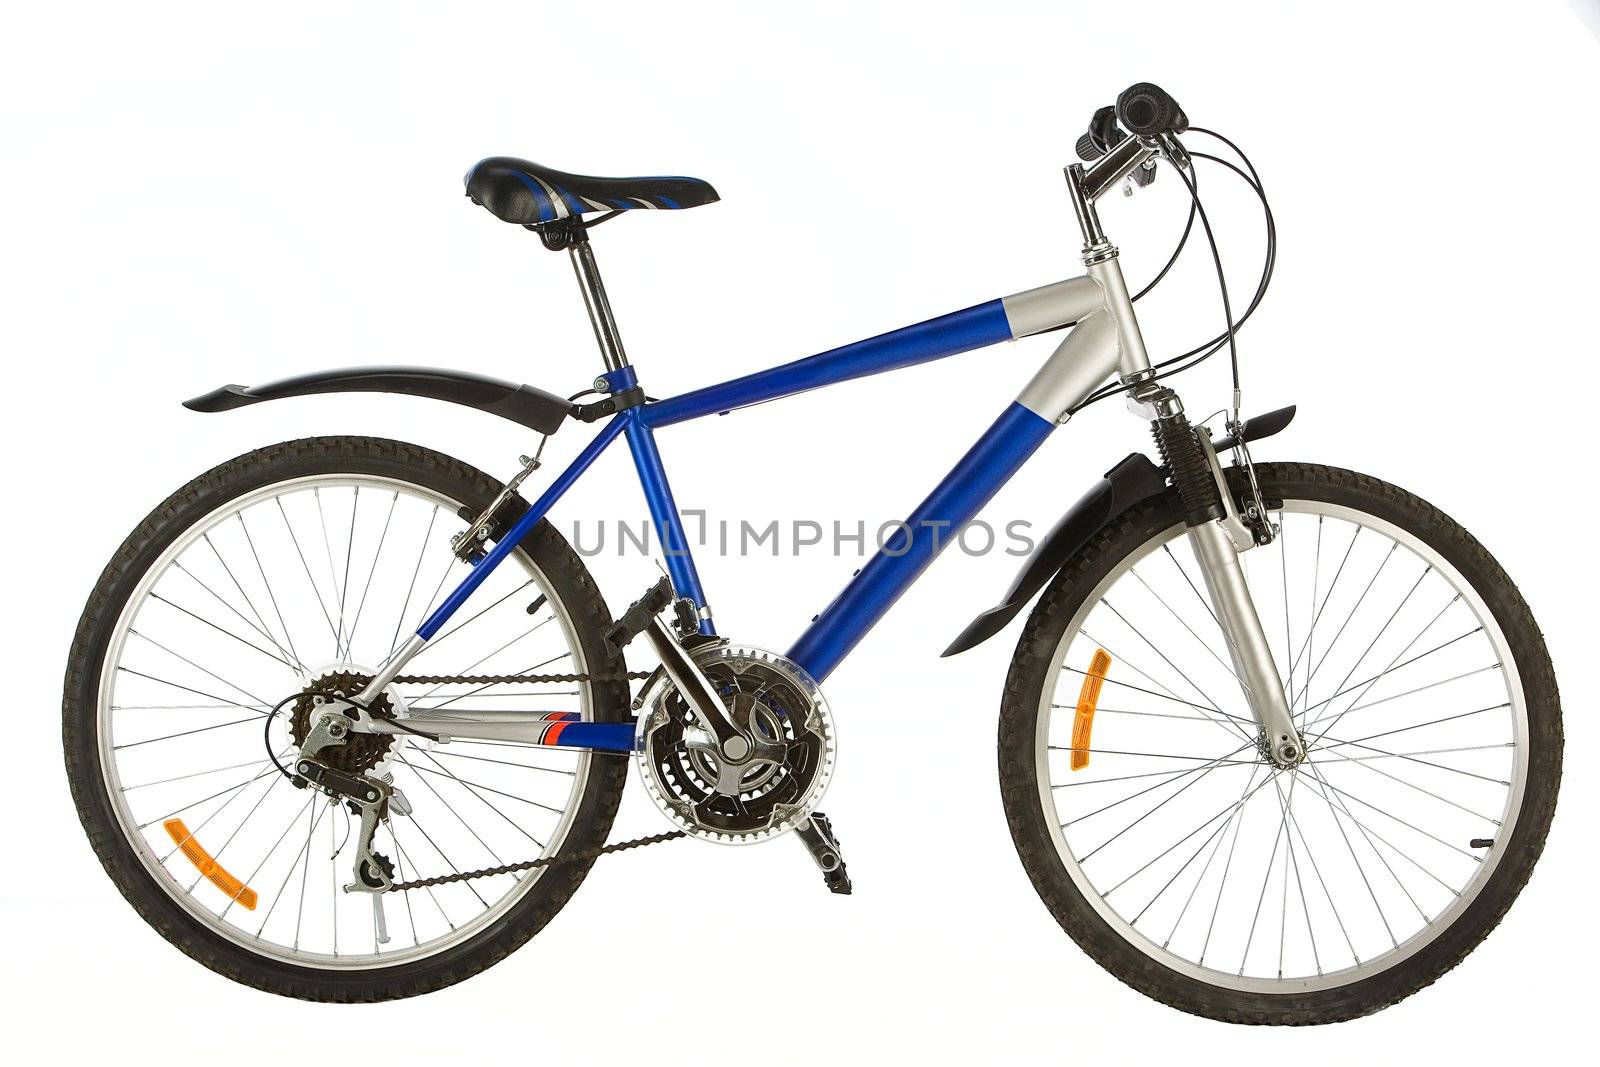 Two-wheeled bicycle close up on a white background
